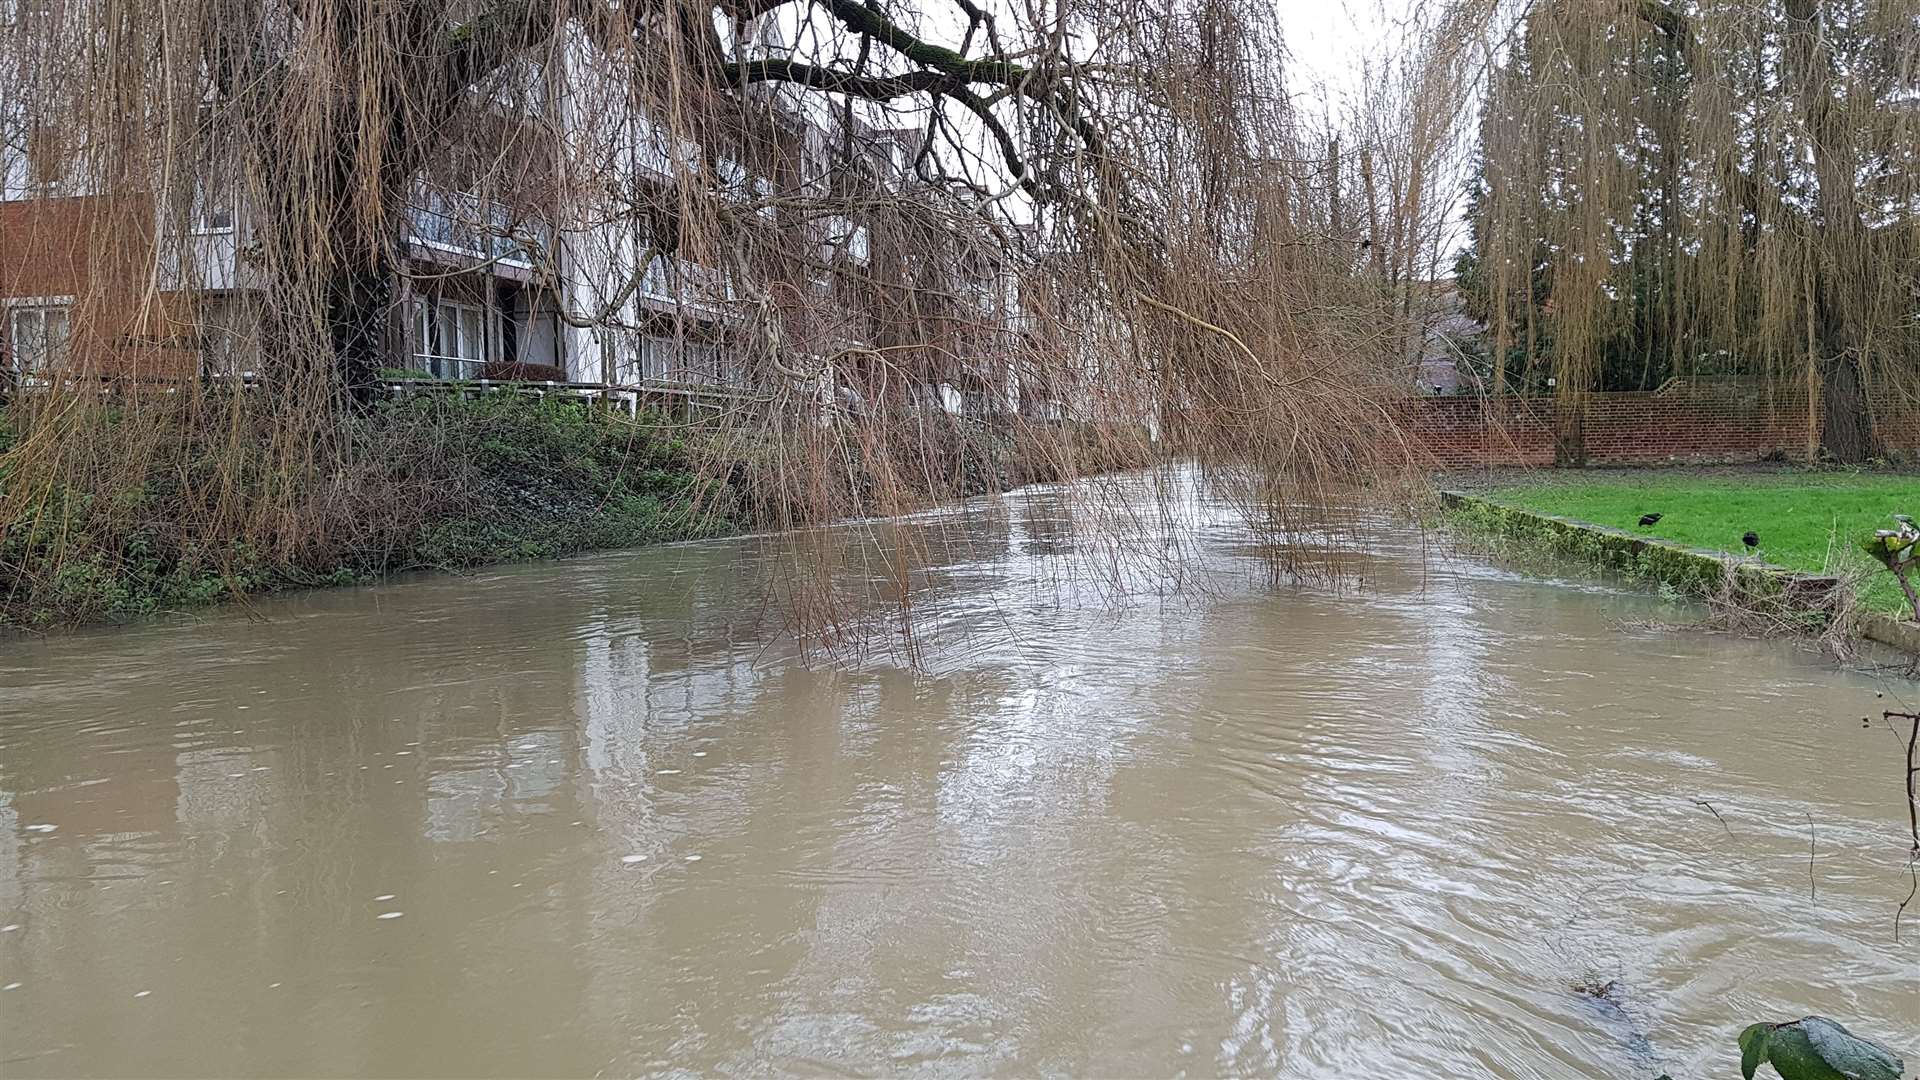 The River Stour in Canterbury, where water levels are currently high after a prolonged period of rain